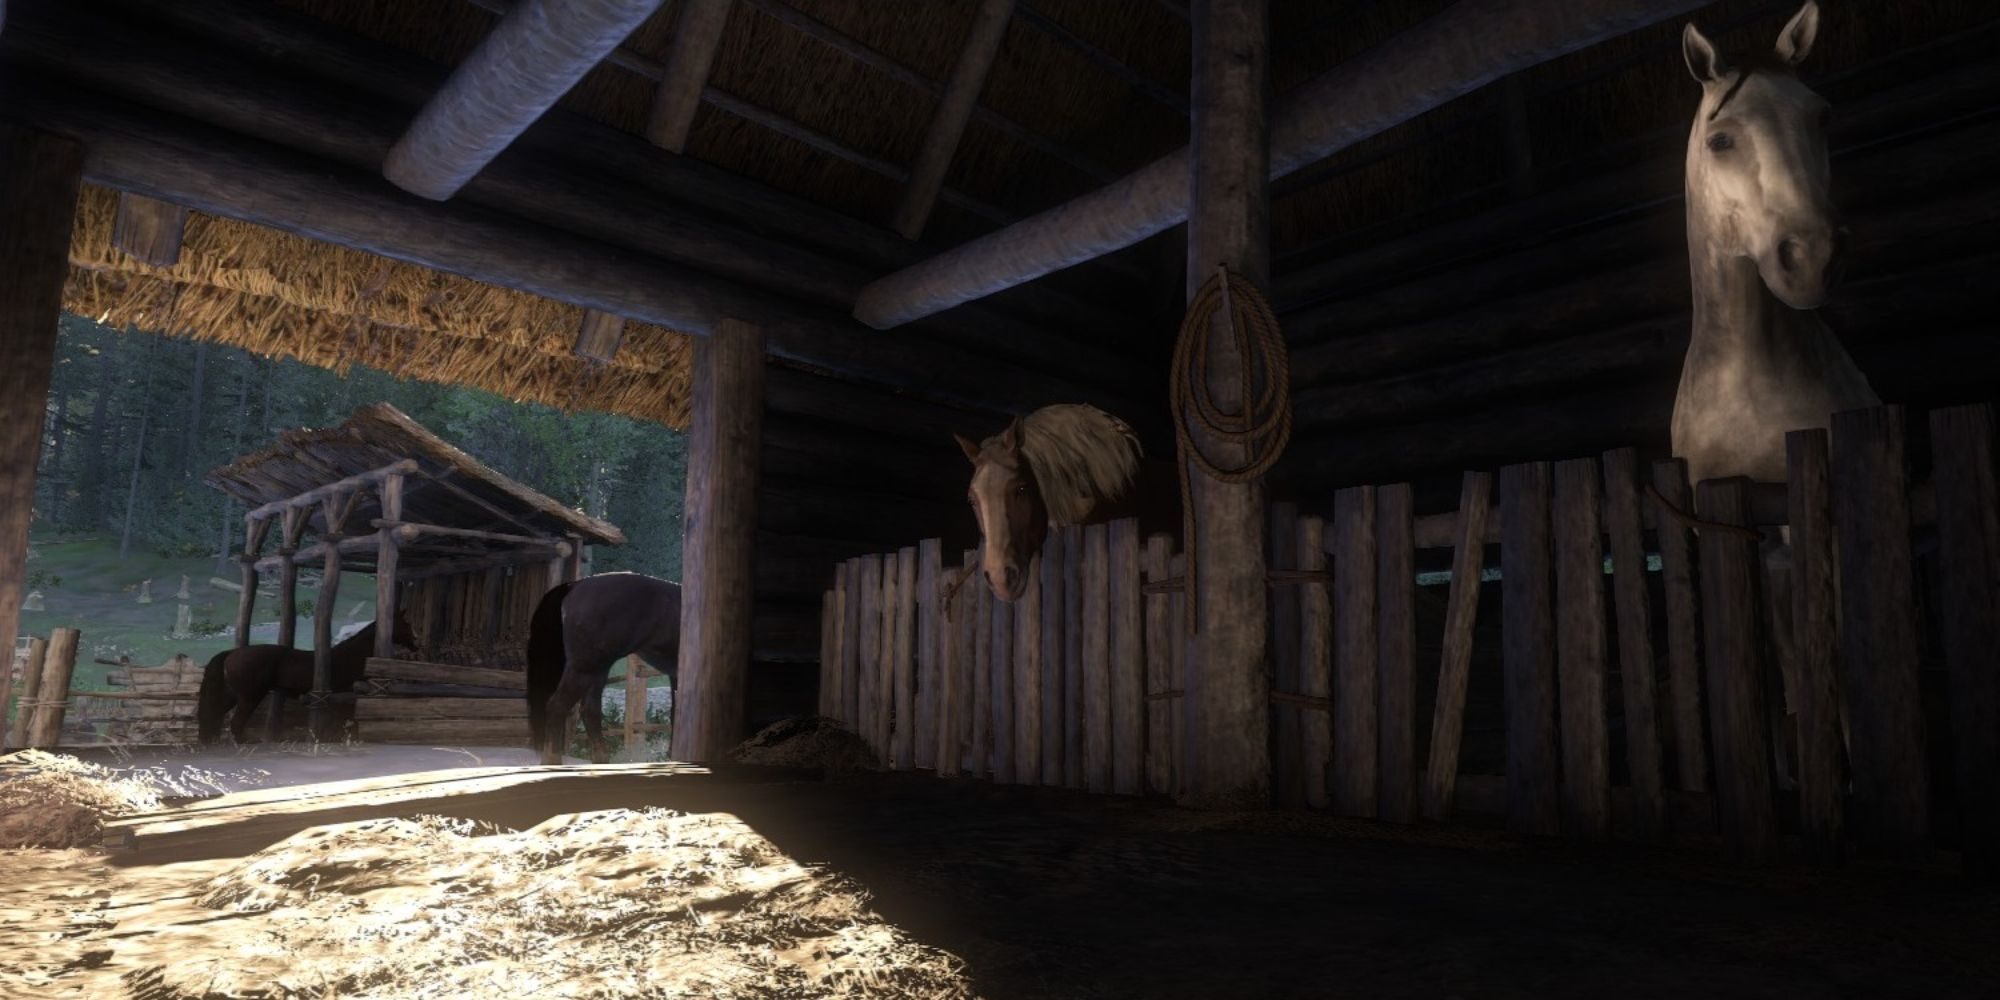 king_come_deliverance_stables_with_ many_horses-2615813